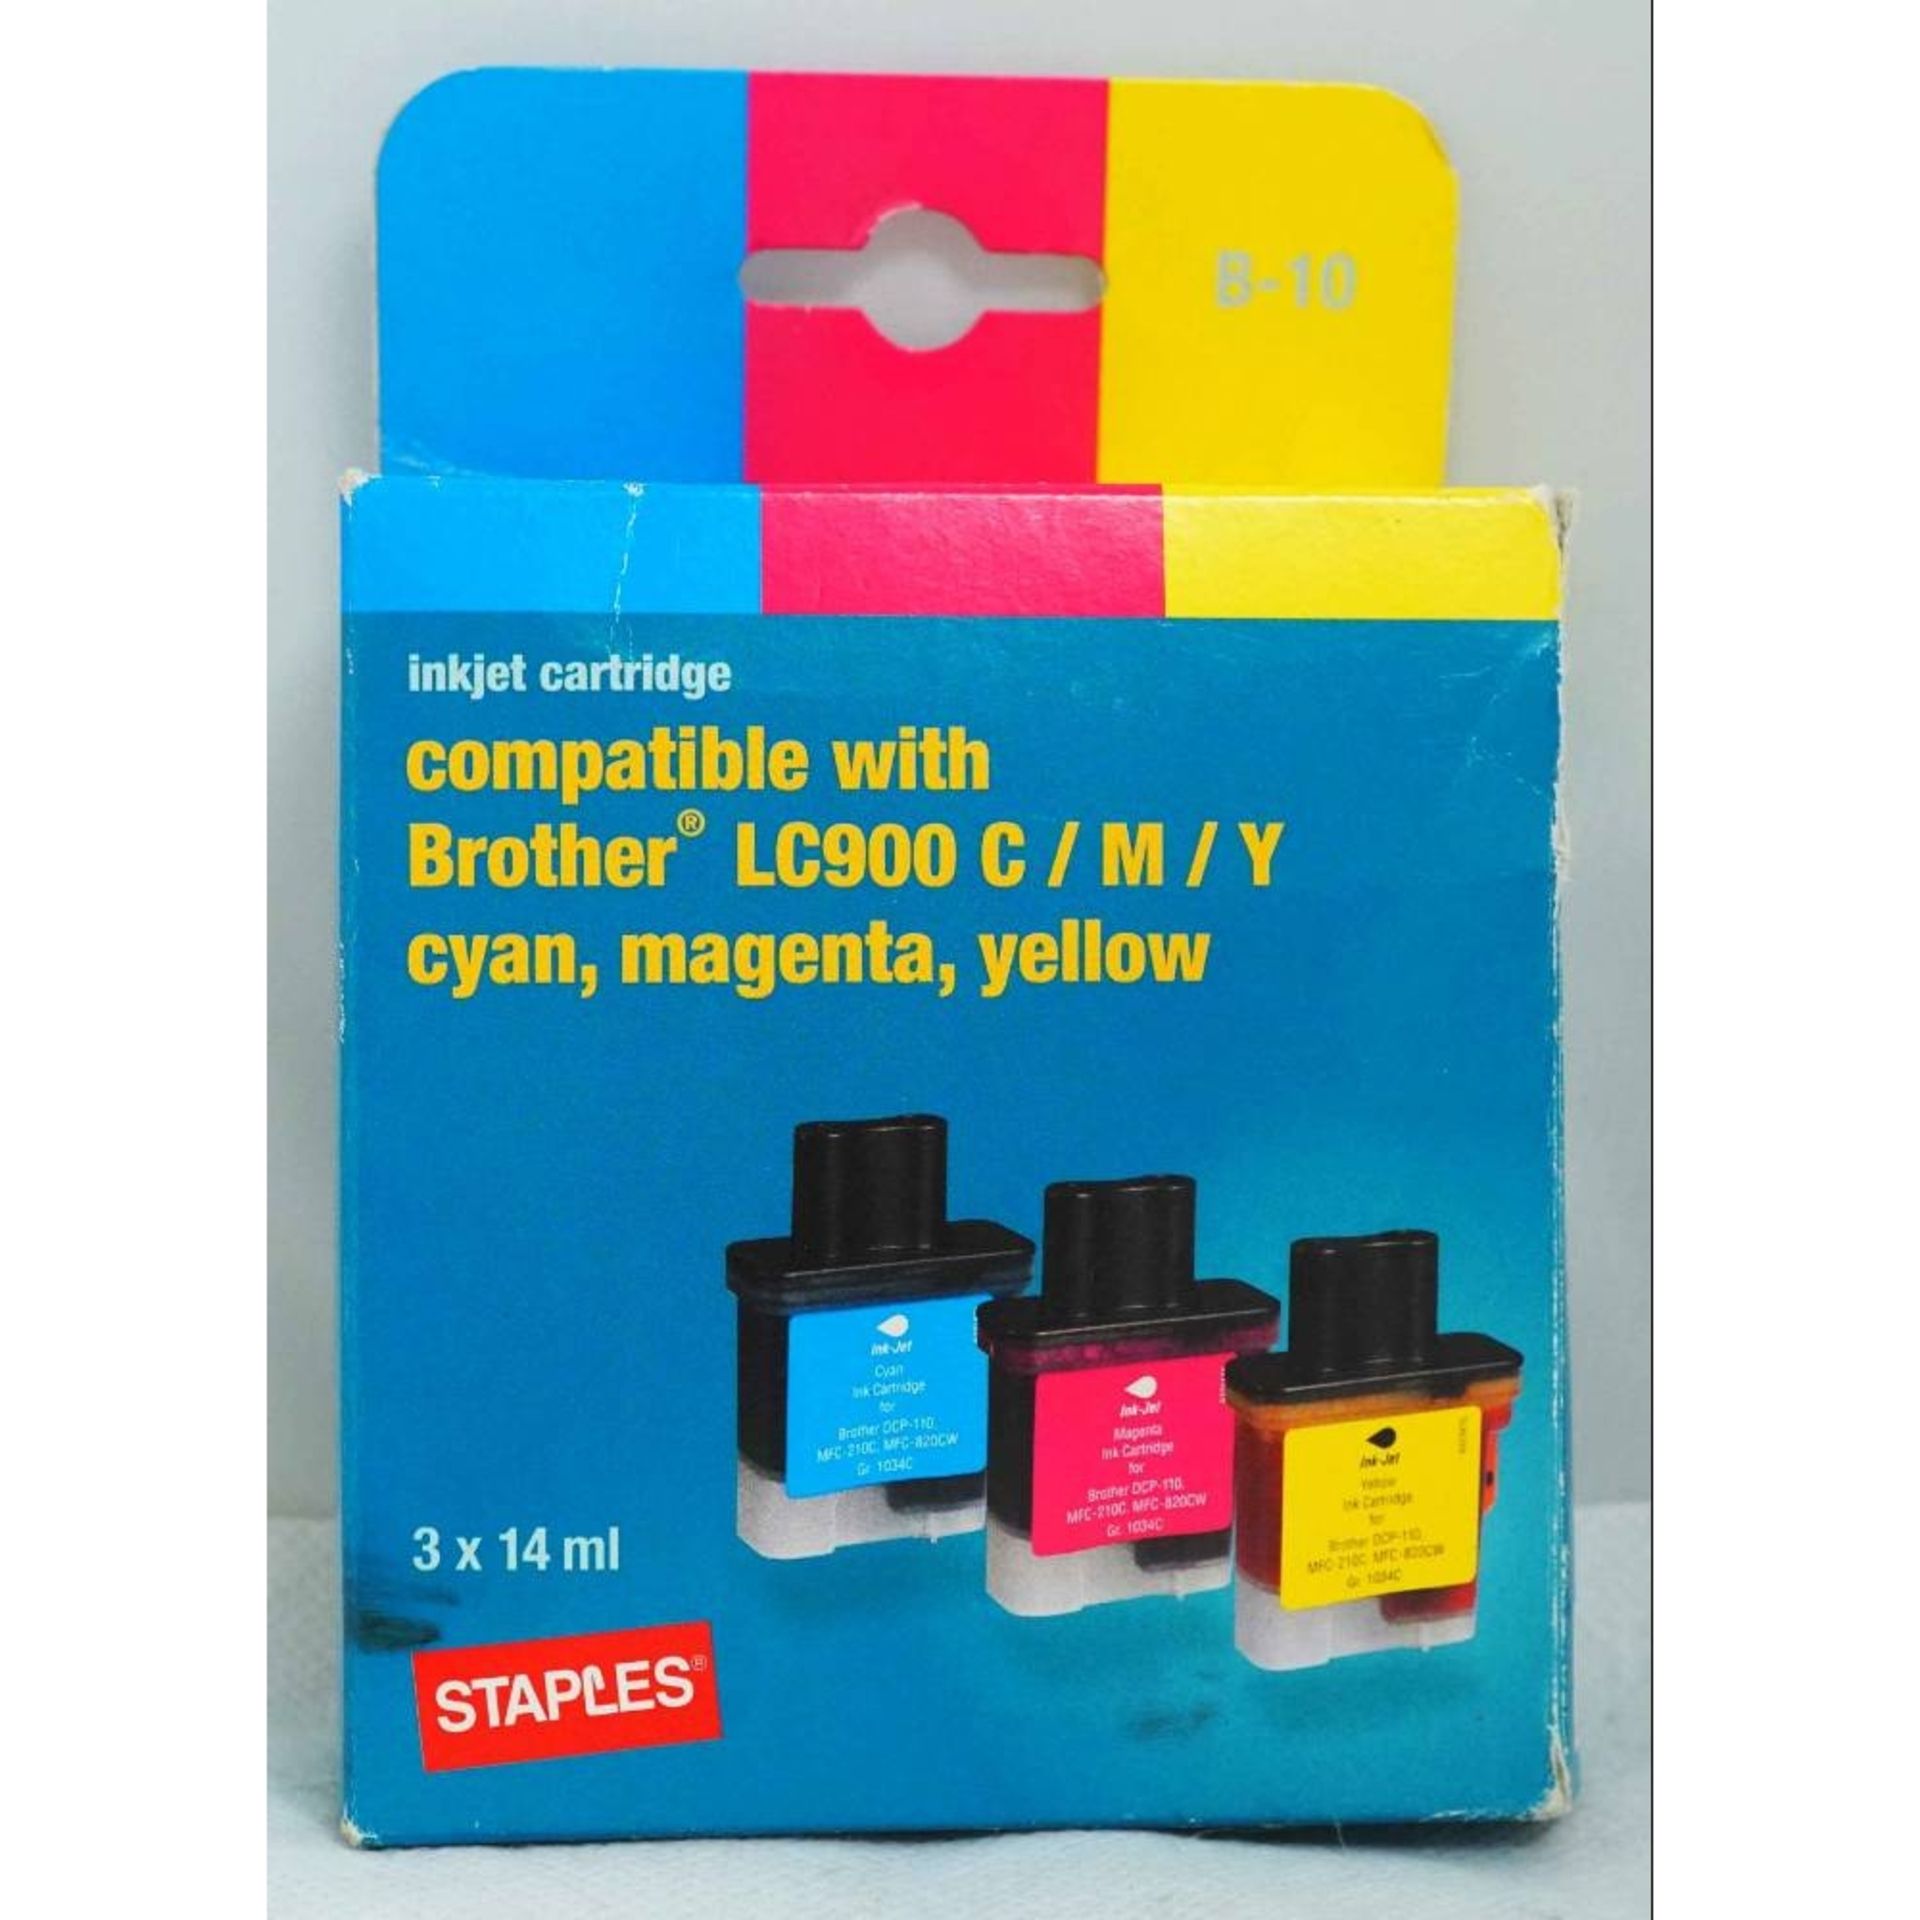 Joblot Staples compatible ink cartridges for HP, Canon, Brother, Lexmark & Epson. Bulk RRP £1,396.56 - Image 6 of 7